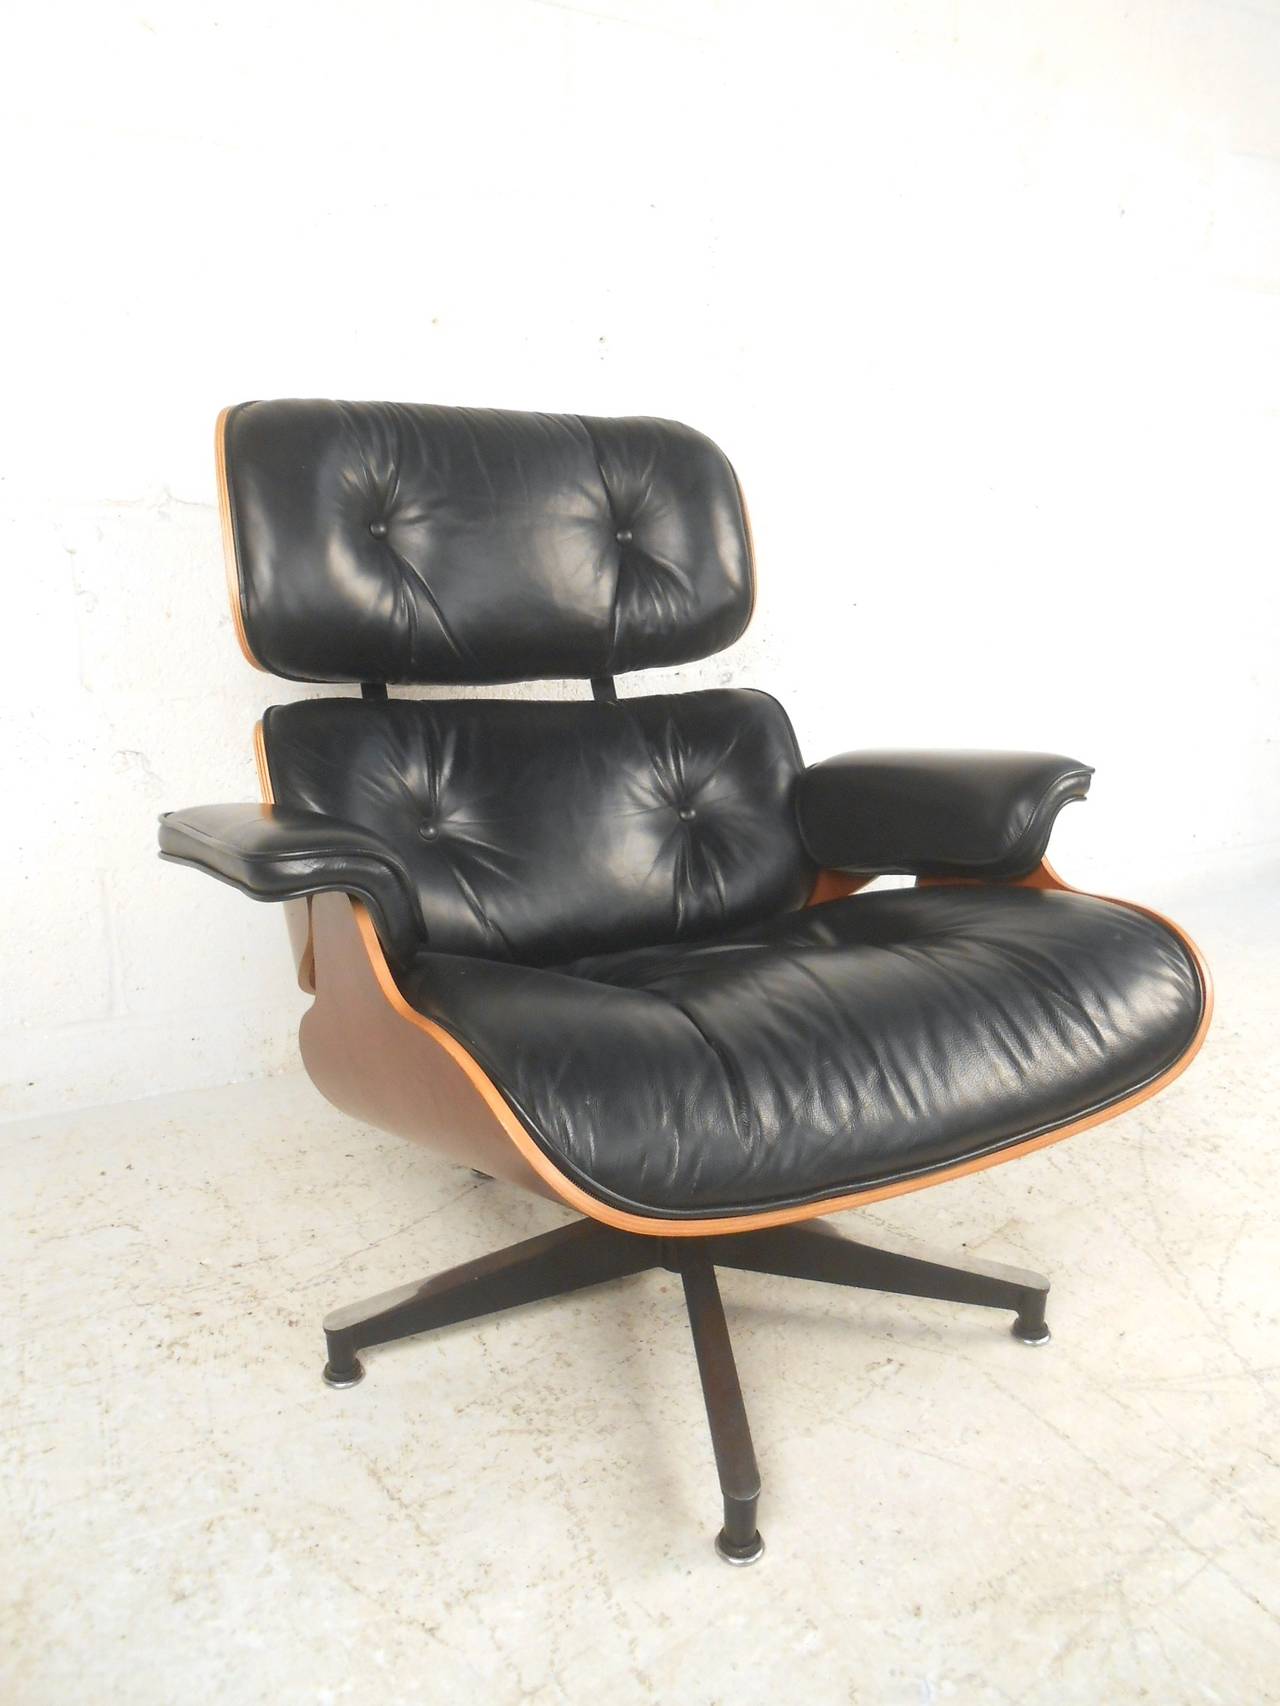 This modern Herman Miller swivel chair with ottoman makes for the ultimate mix of vintage style and comfort for any room. Original manufacturers tags are on this contemporary edition of their Classic design. Please confirm item location (NY or NJ).